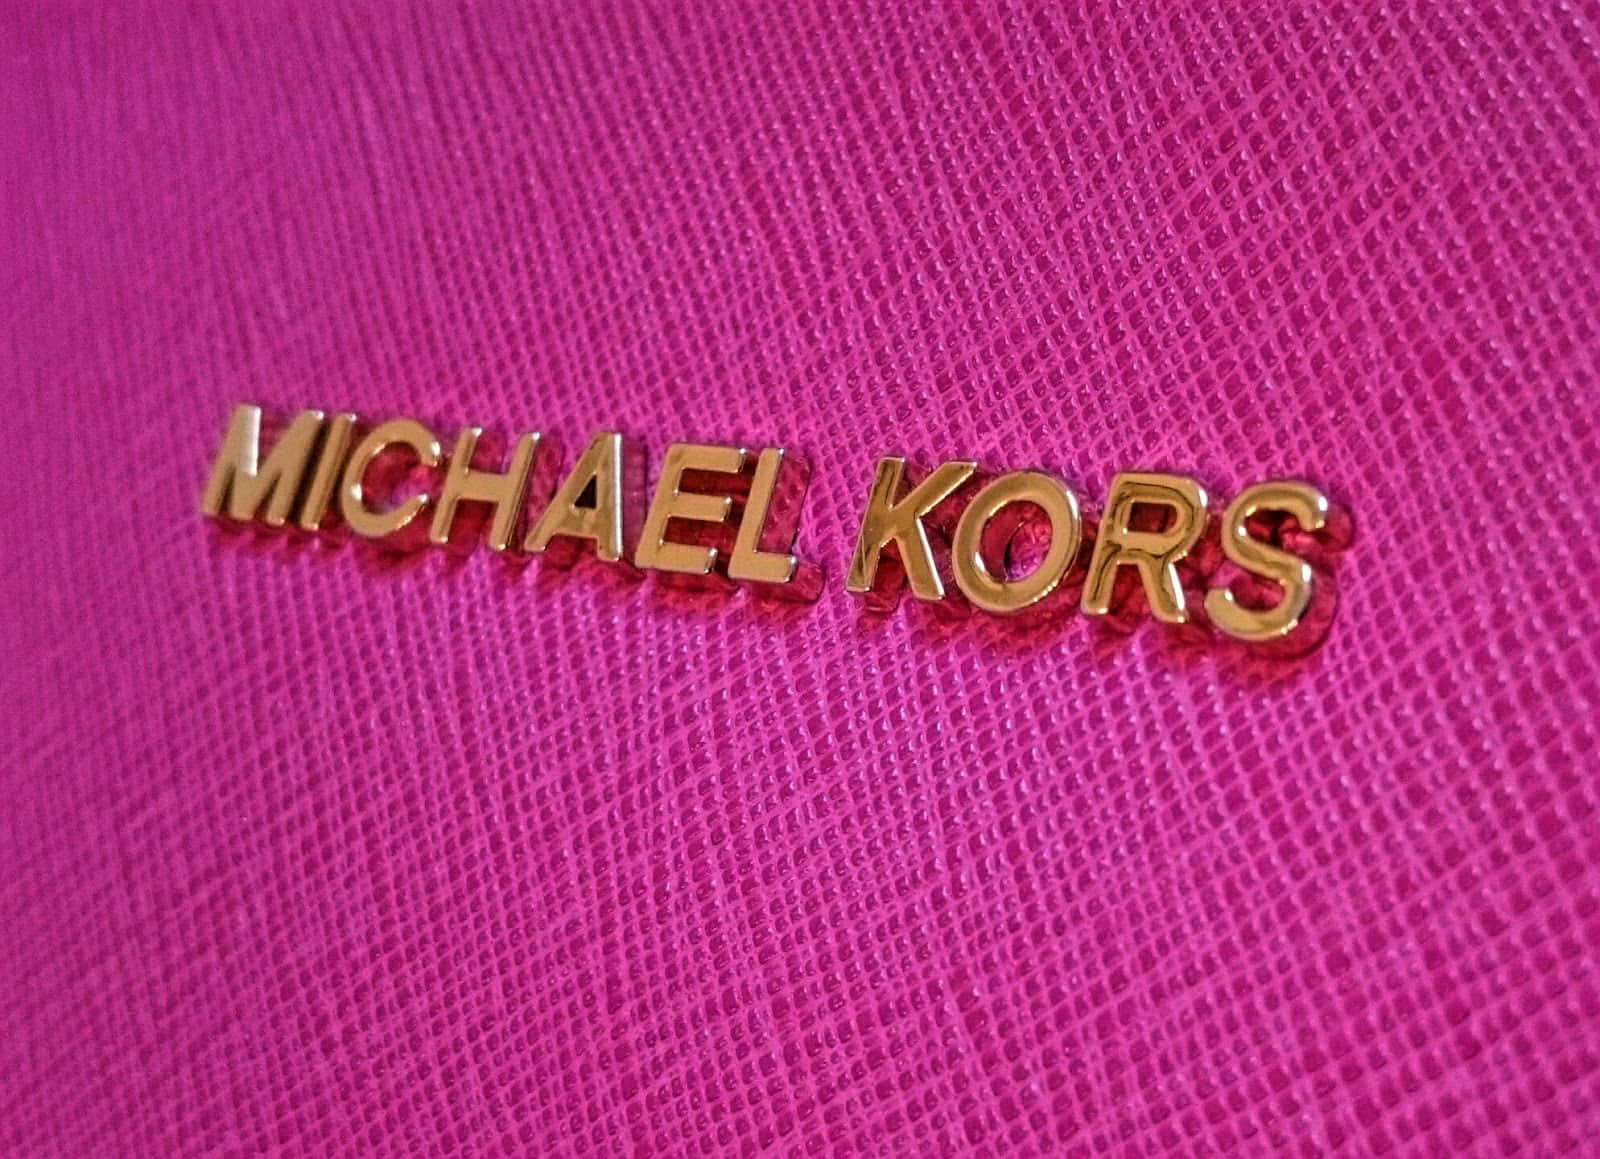 Shop Michael Kors for the latest designer apparel, accessories and footwear